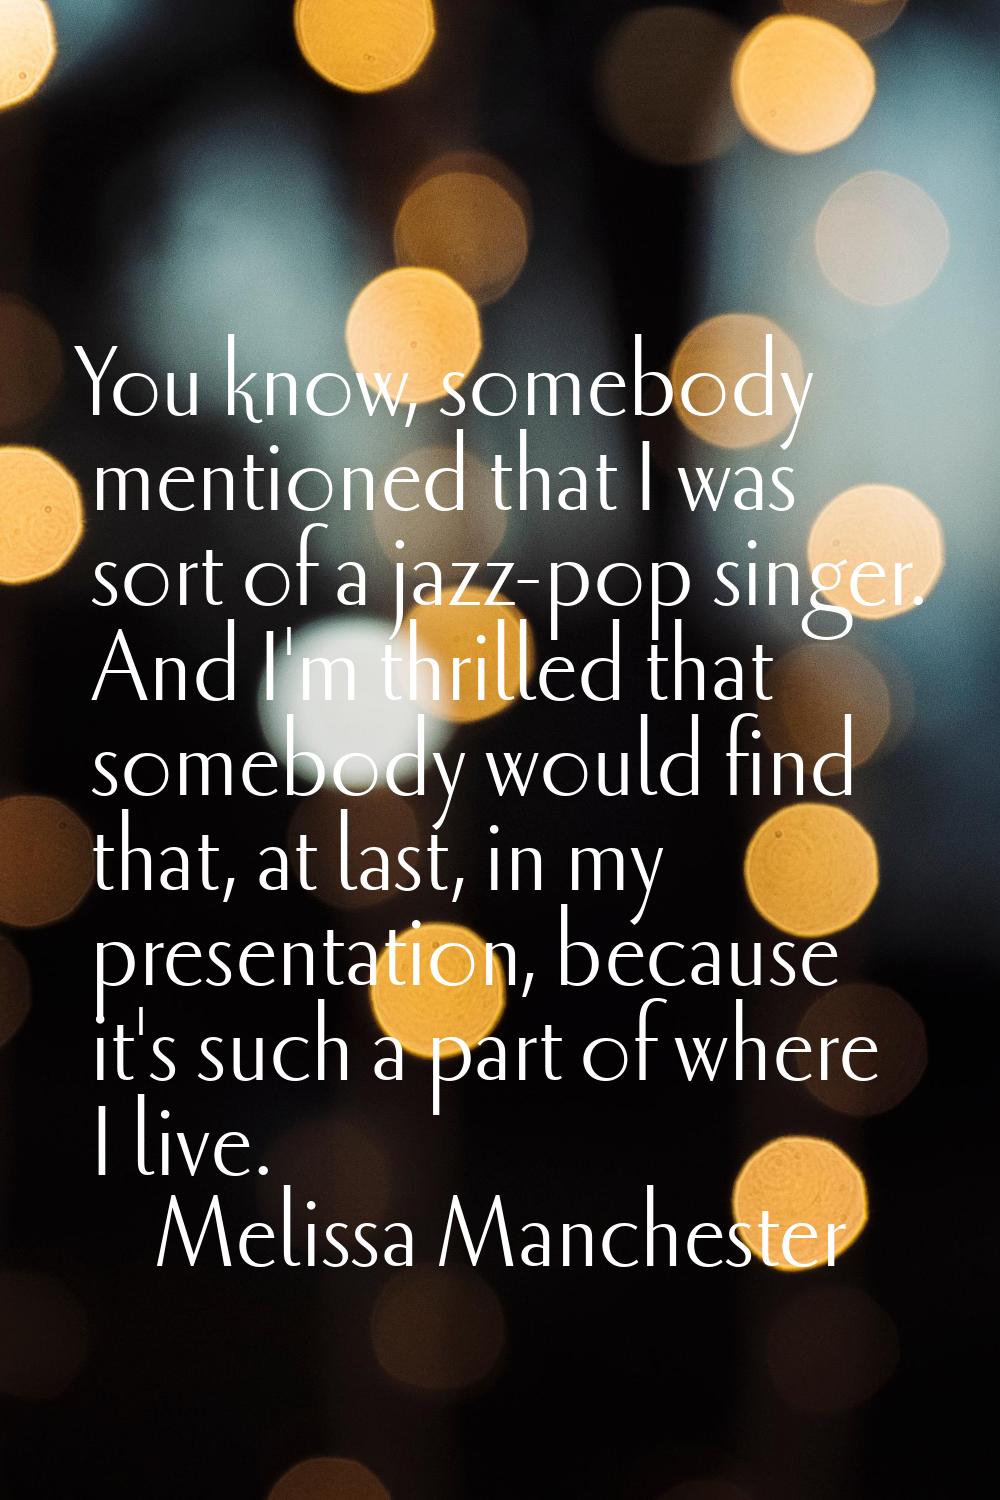 You know, somebody mentioned that I was sort of a jazz-pop singer. And I'm thrilled that somebody w